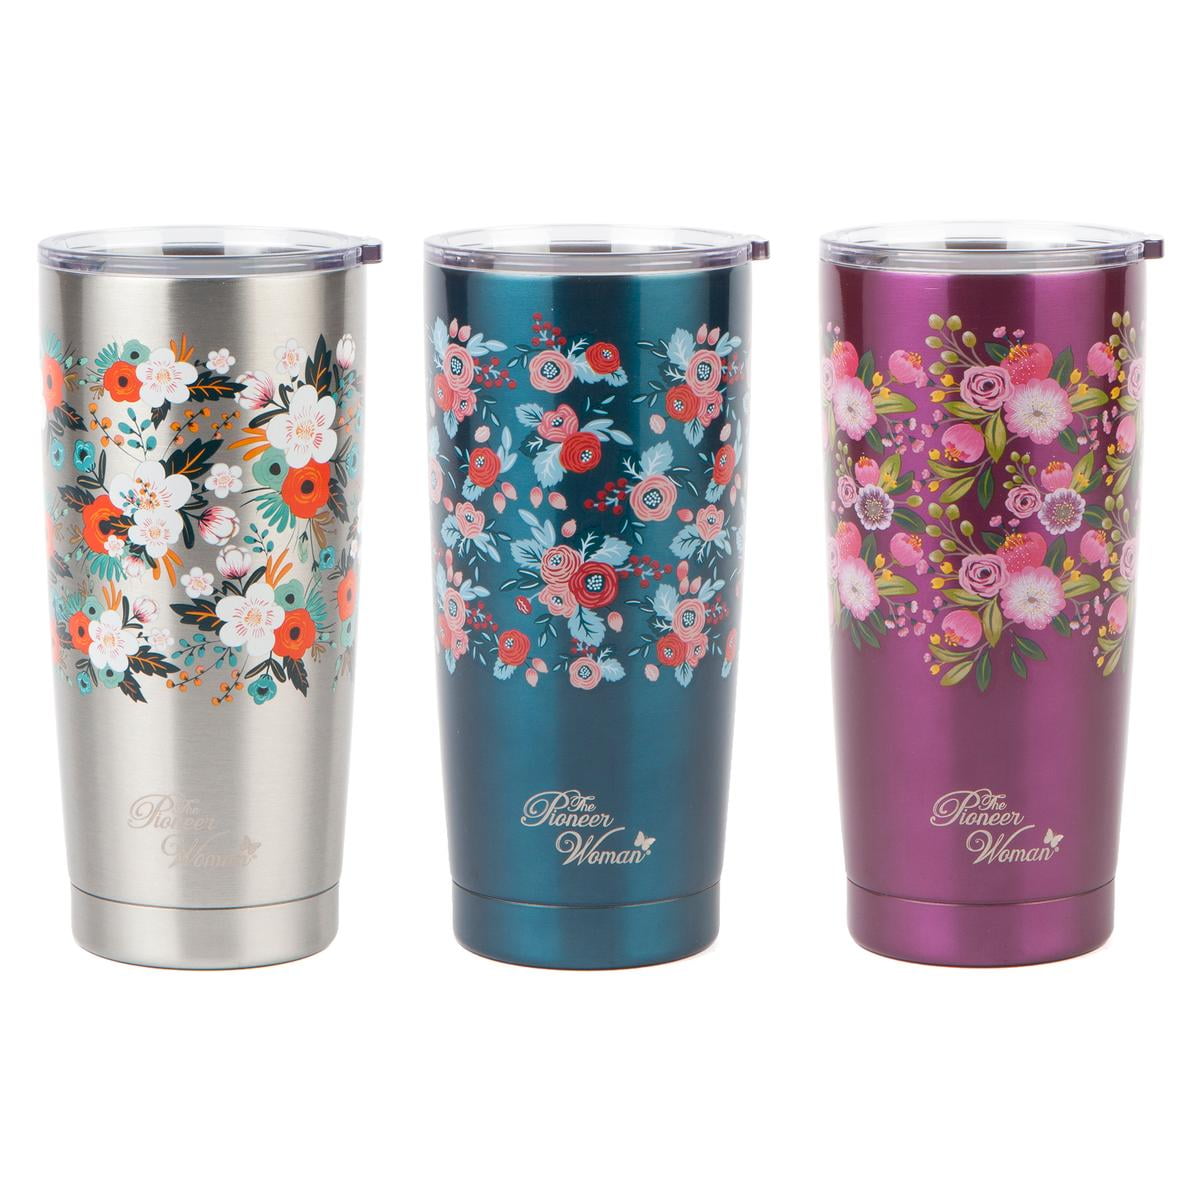 The Pioneer Woman Breezy Stainless Steel Tumbler Double Wall Insulated 24 oz New